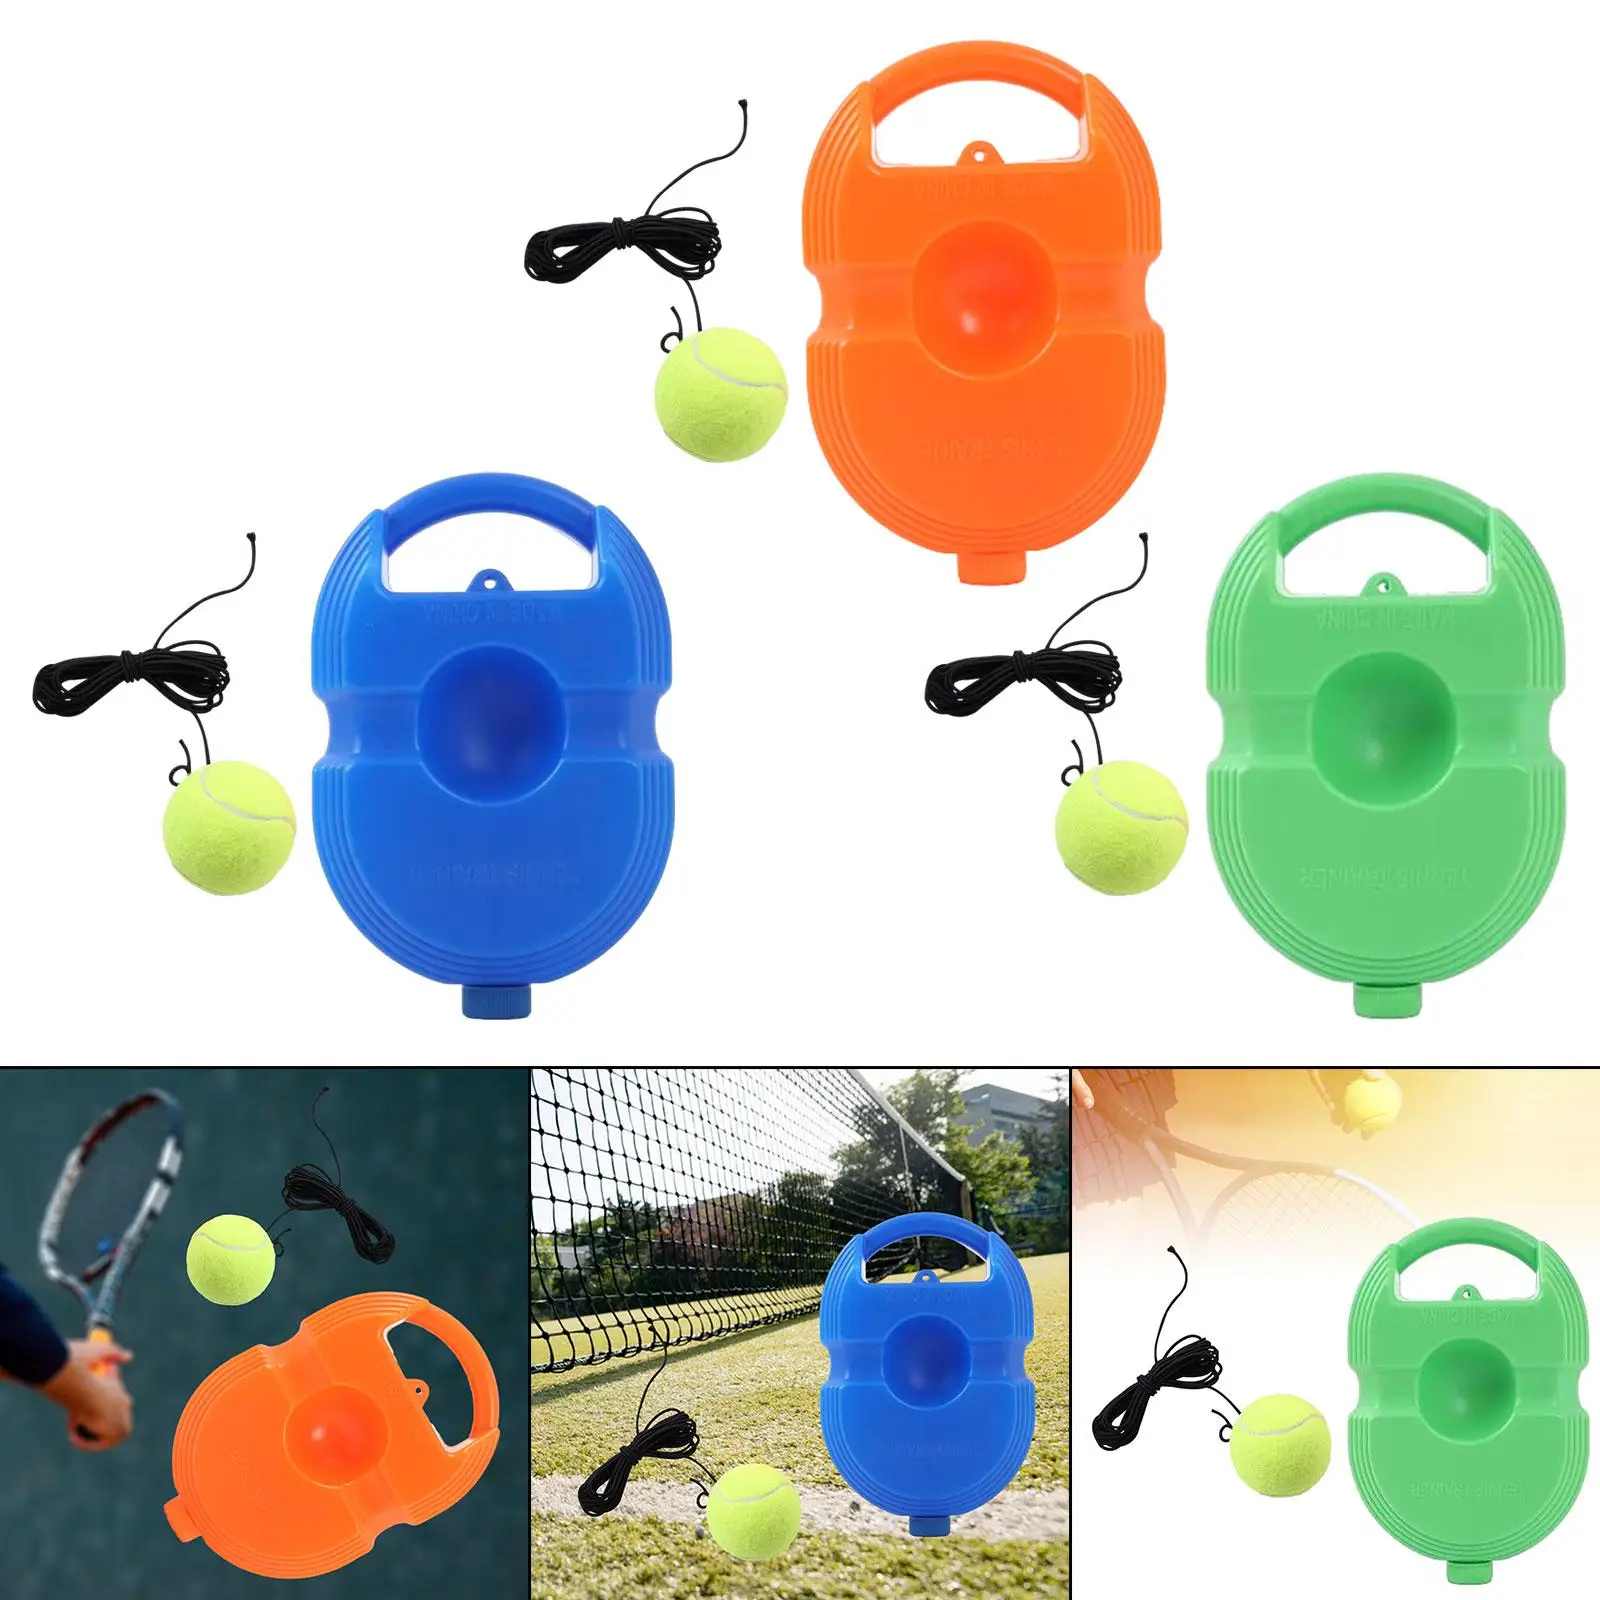 Tennis Trainer Portable Self Training Sport Tool Tennis Training Tool Tennis Practice Device for Kids Adults Beginners Exercise